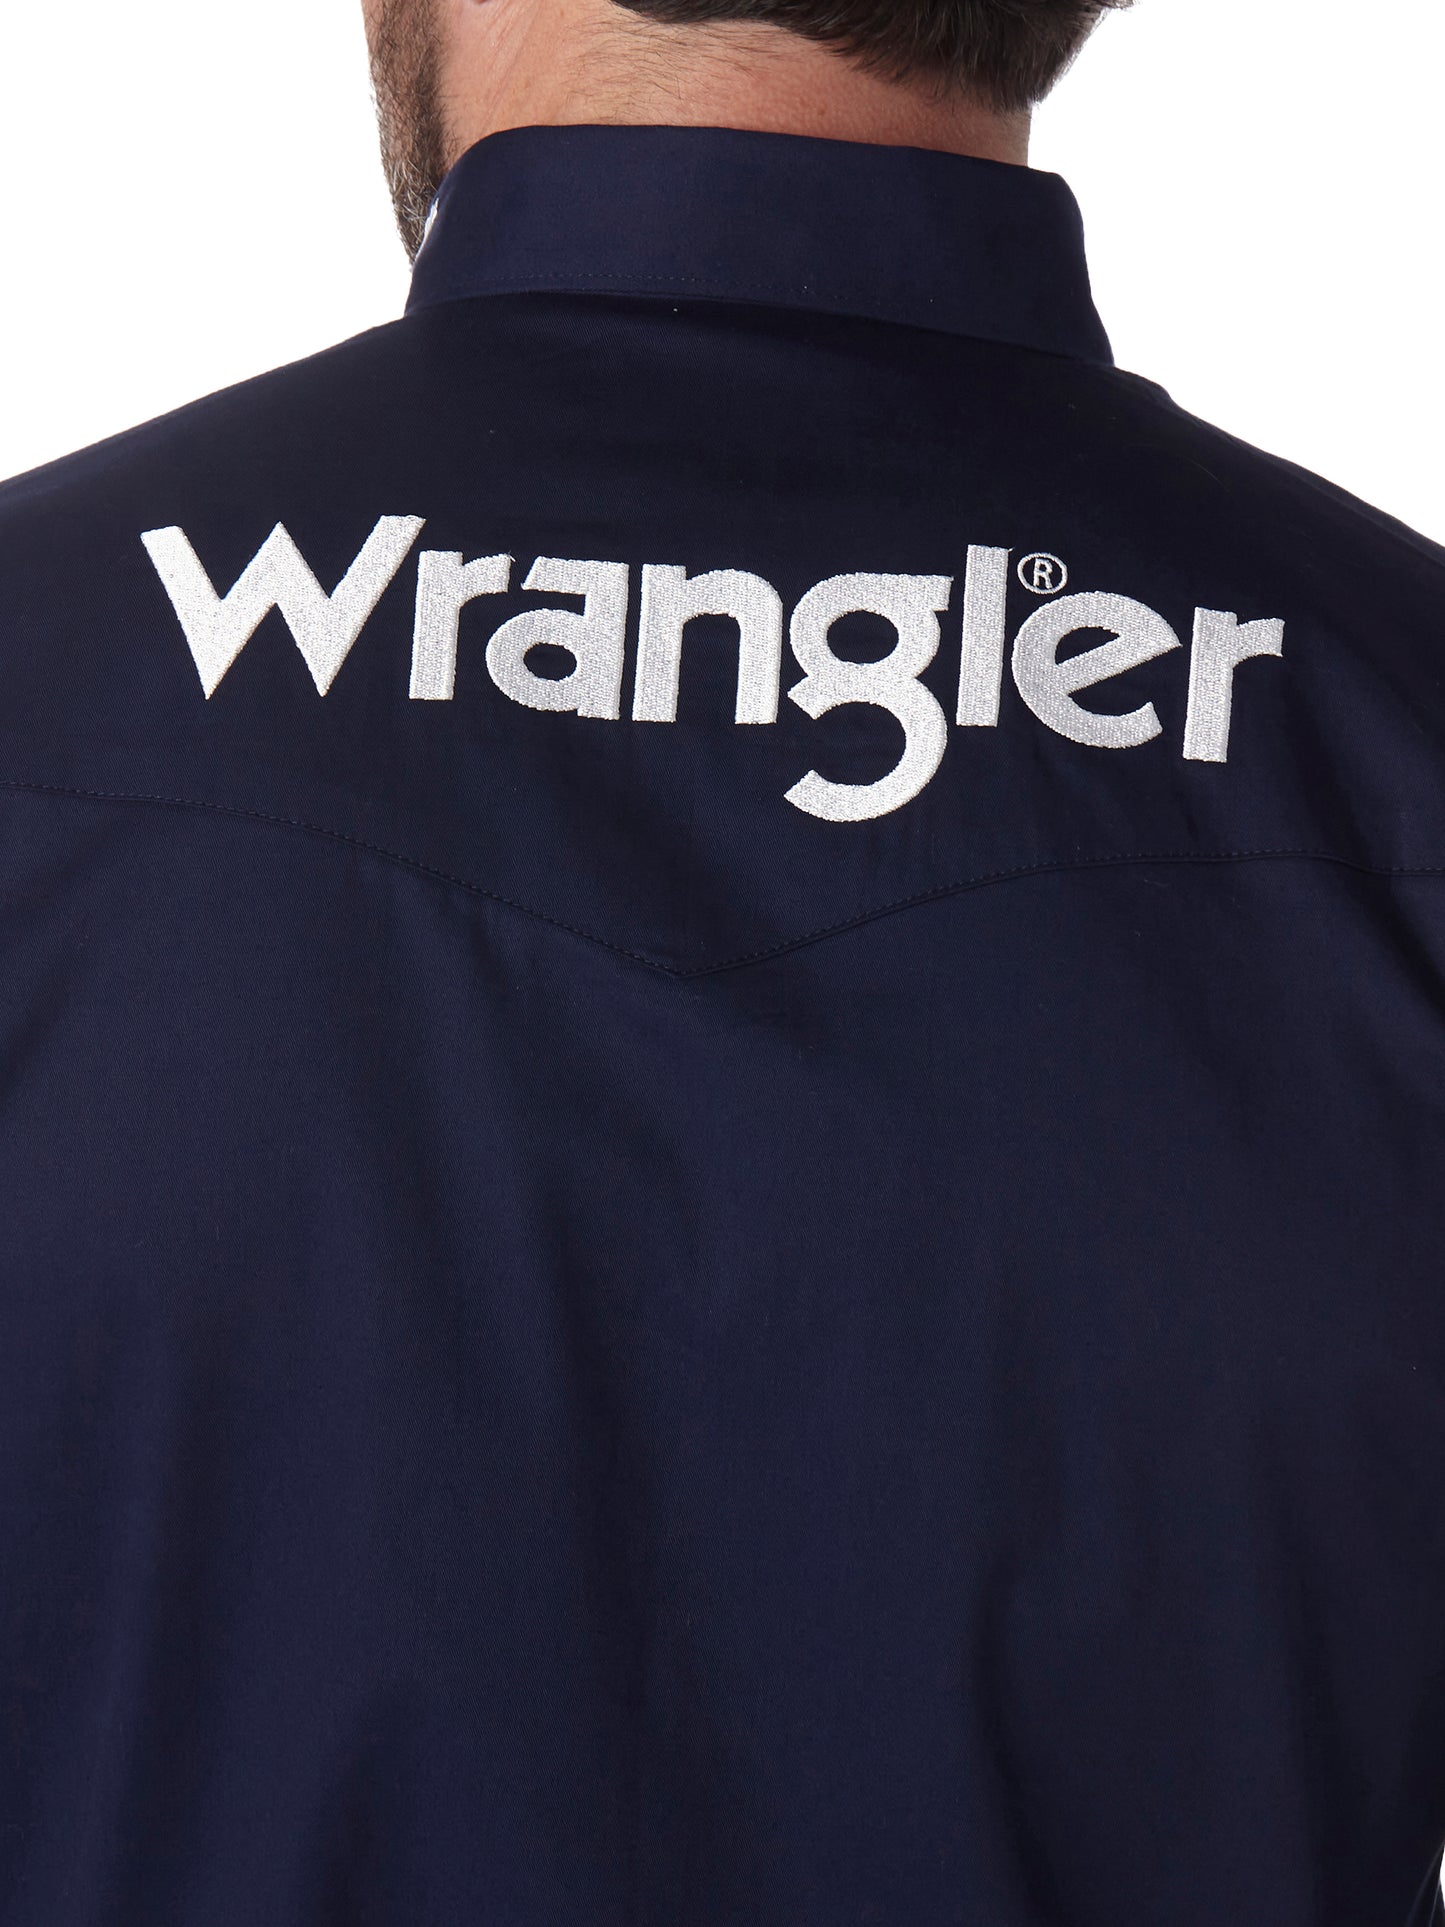 MP2327N Men's Navy and White Logo Solid Button Down Shirt by Wrangler